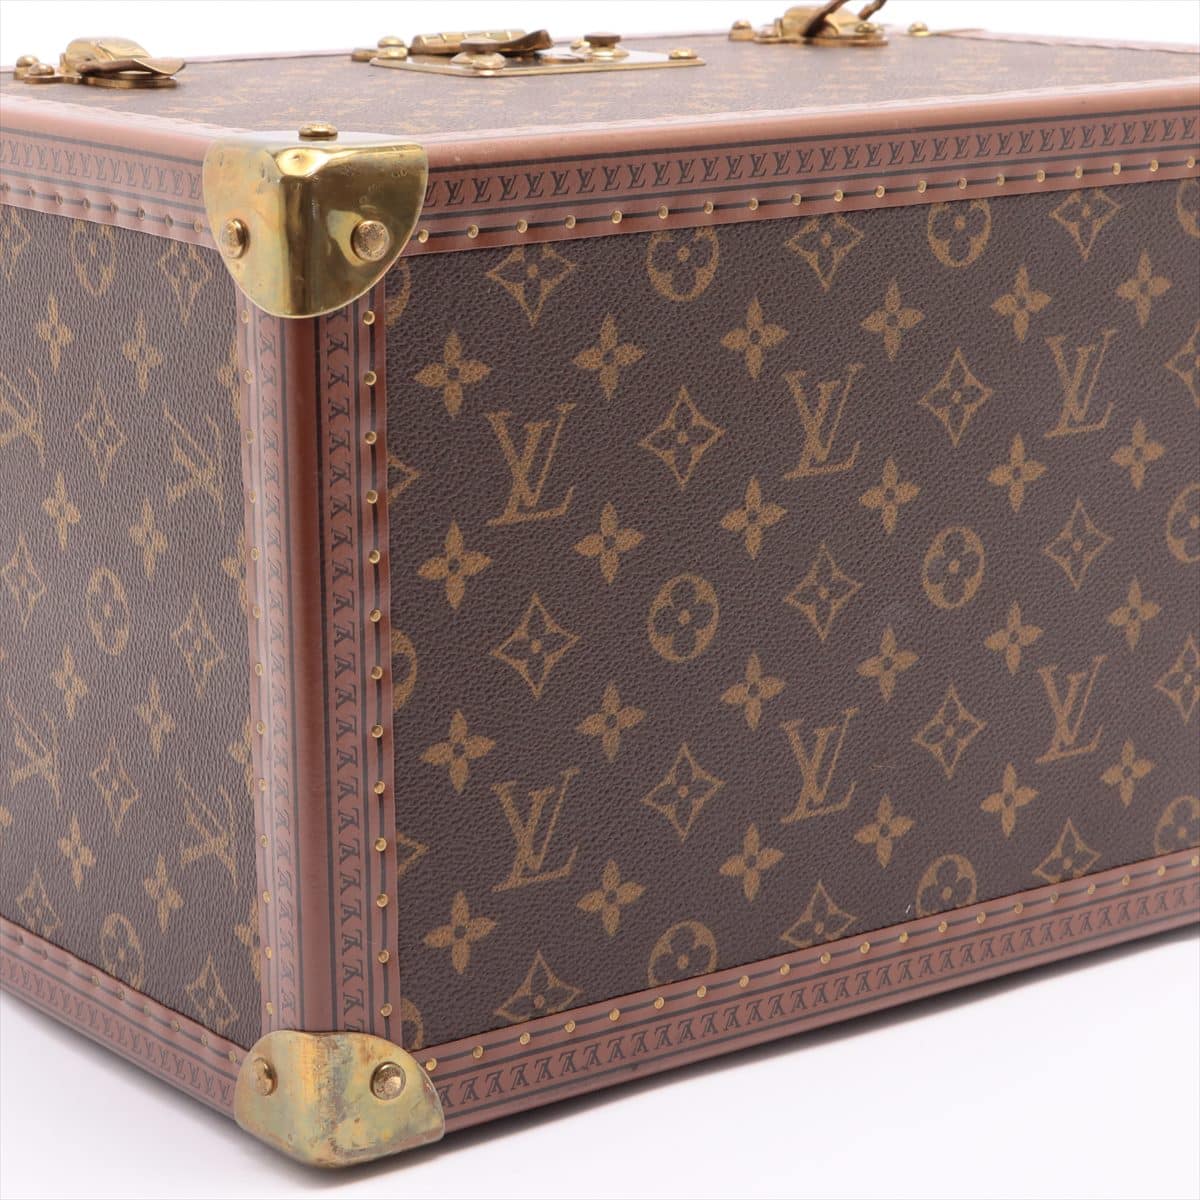 Louis Vuitton Monogram Boite Pharmacie M21826 Comes with 1 key, name tag, and makeup case